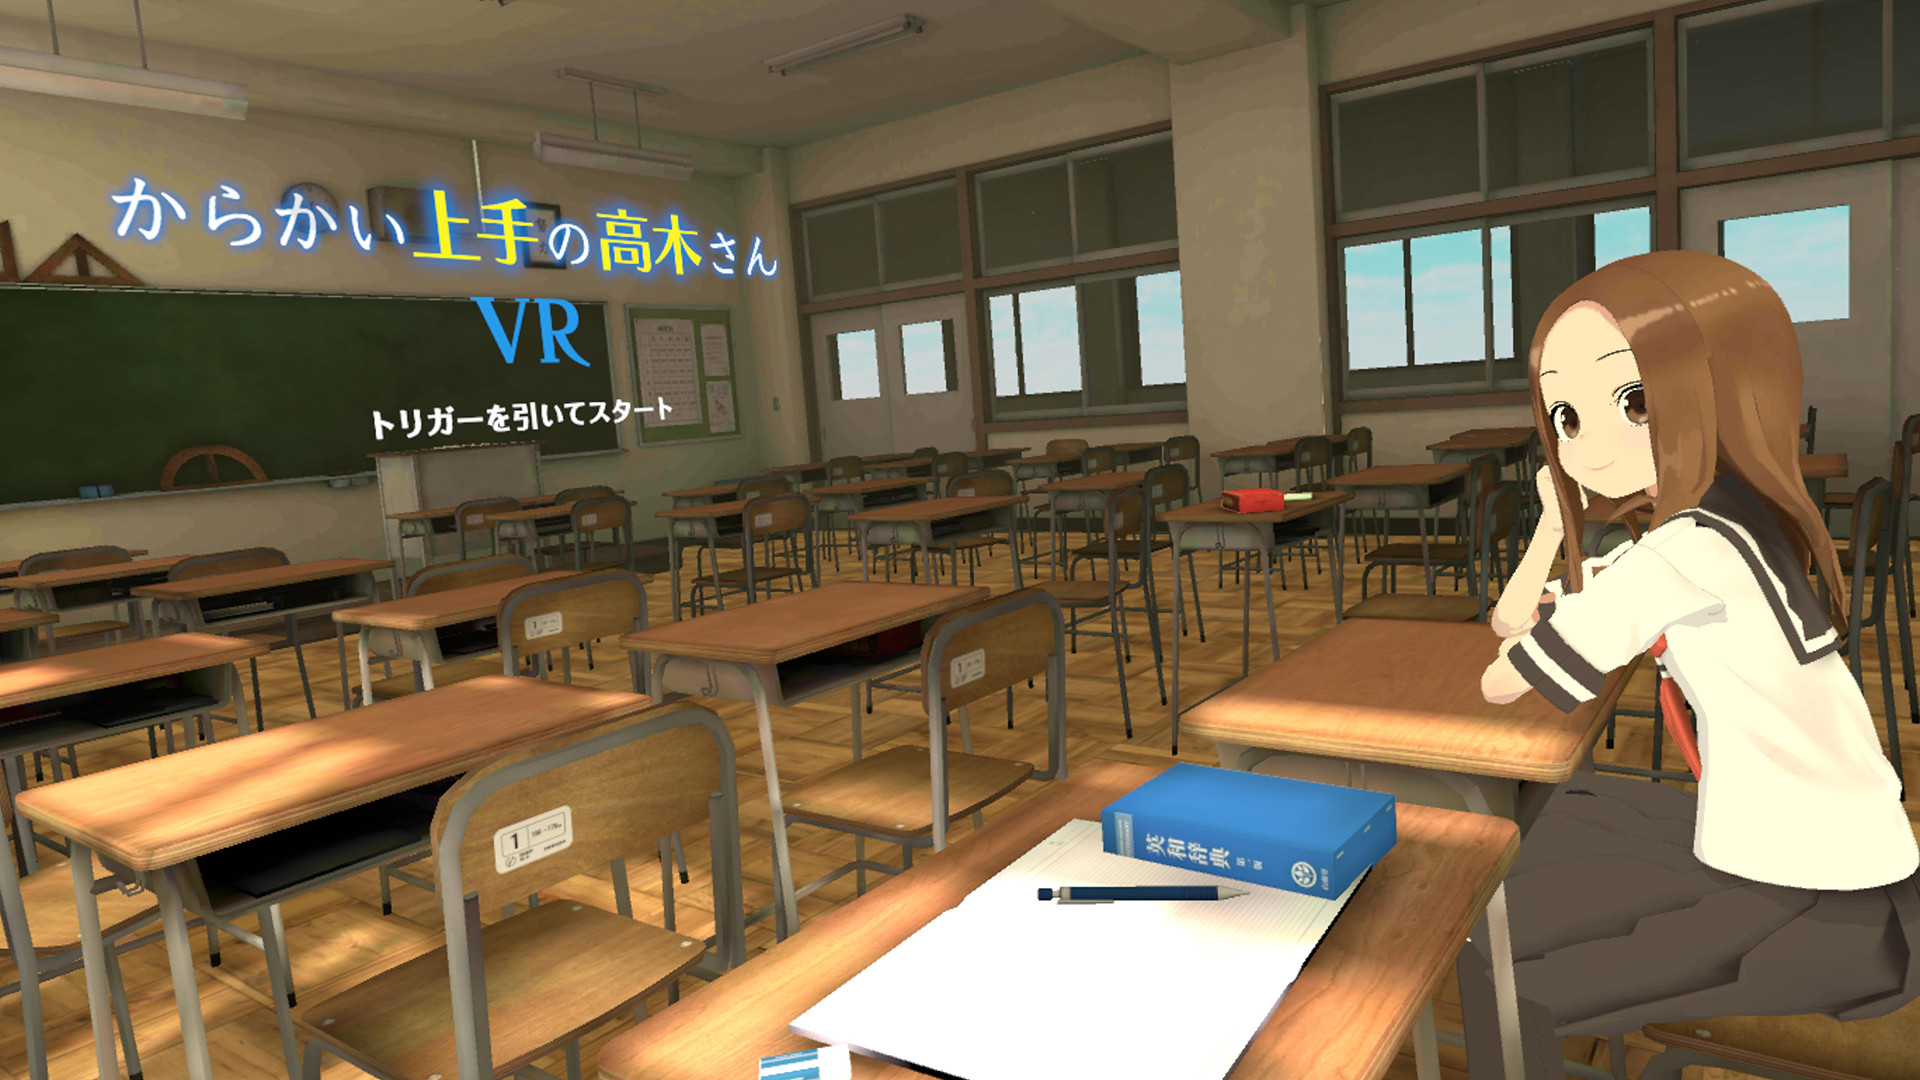 Find the best computers for からかい上手の高木さんVR 1学期